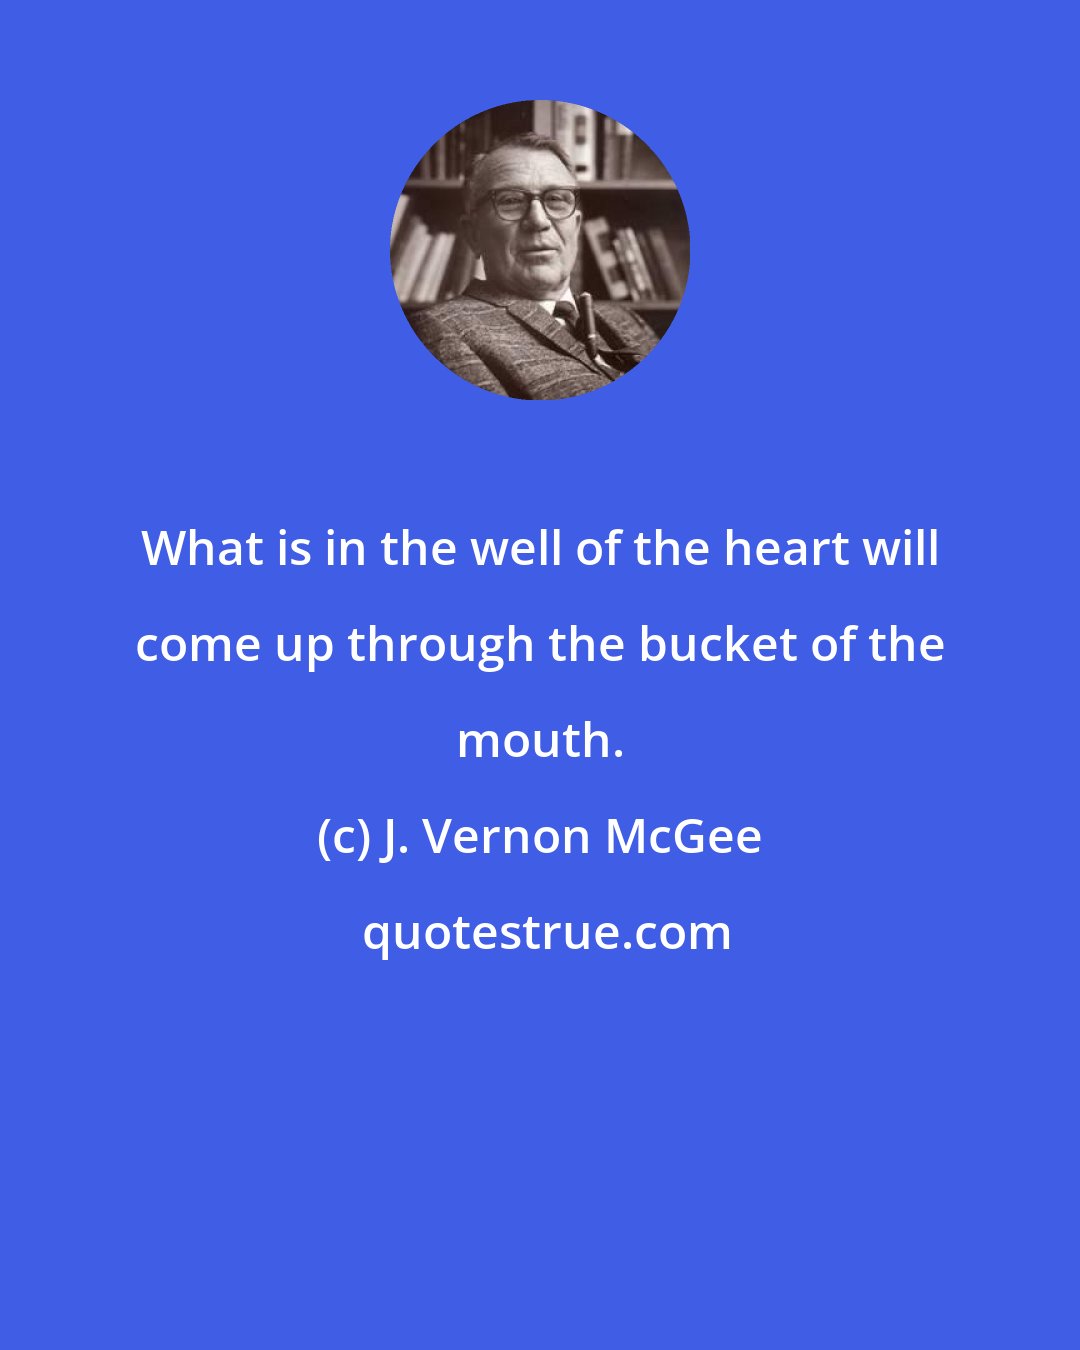 J. Vernon McGee: What is in the well of the heart will come up through the bucket of the mouth.